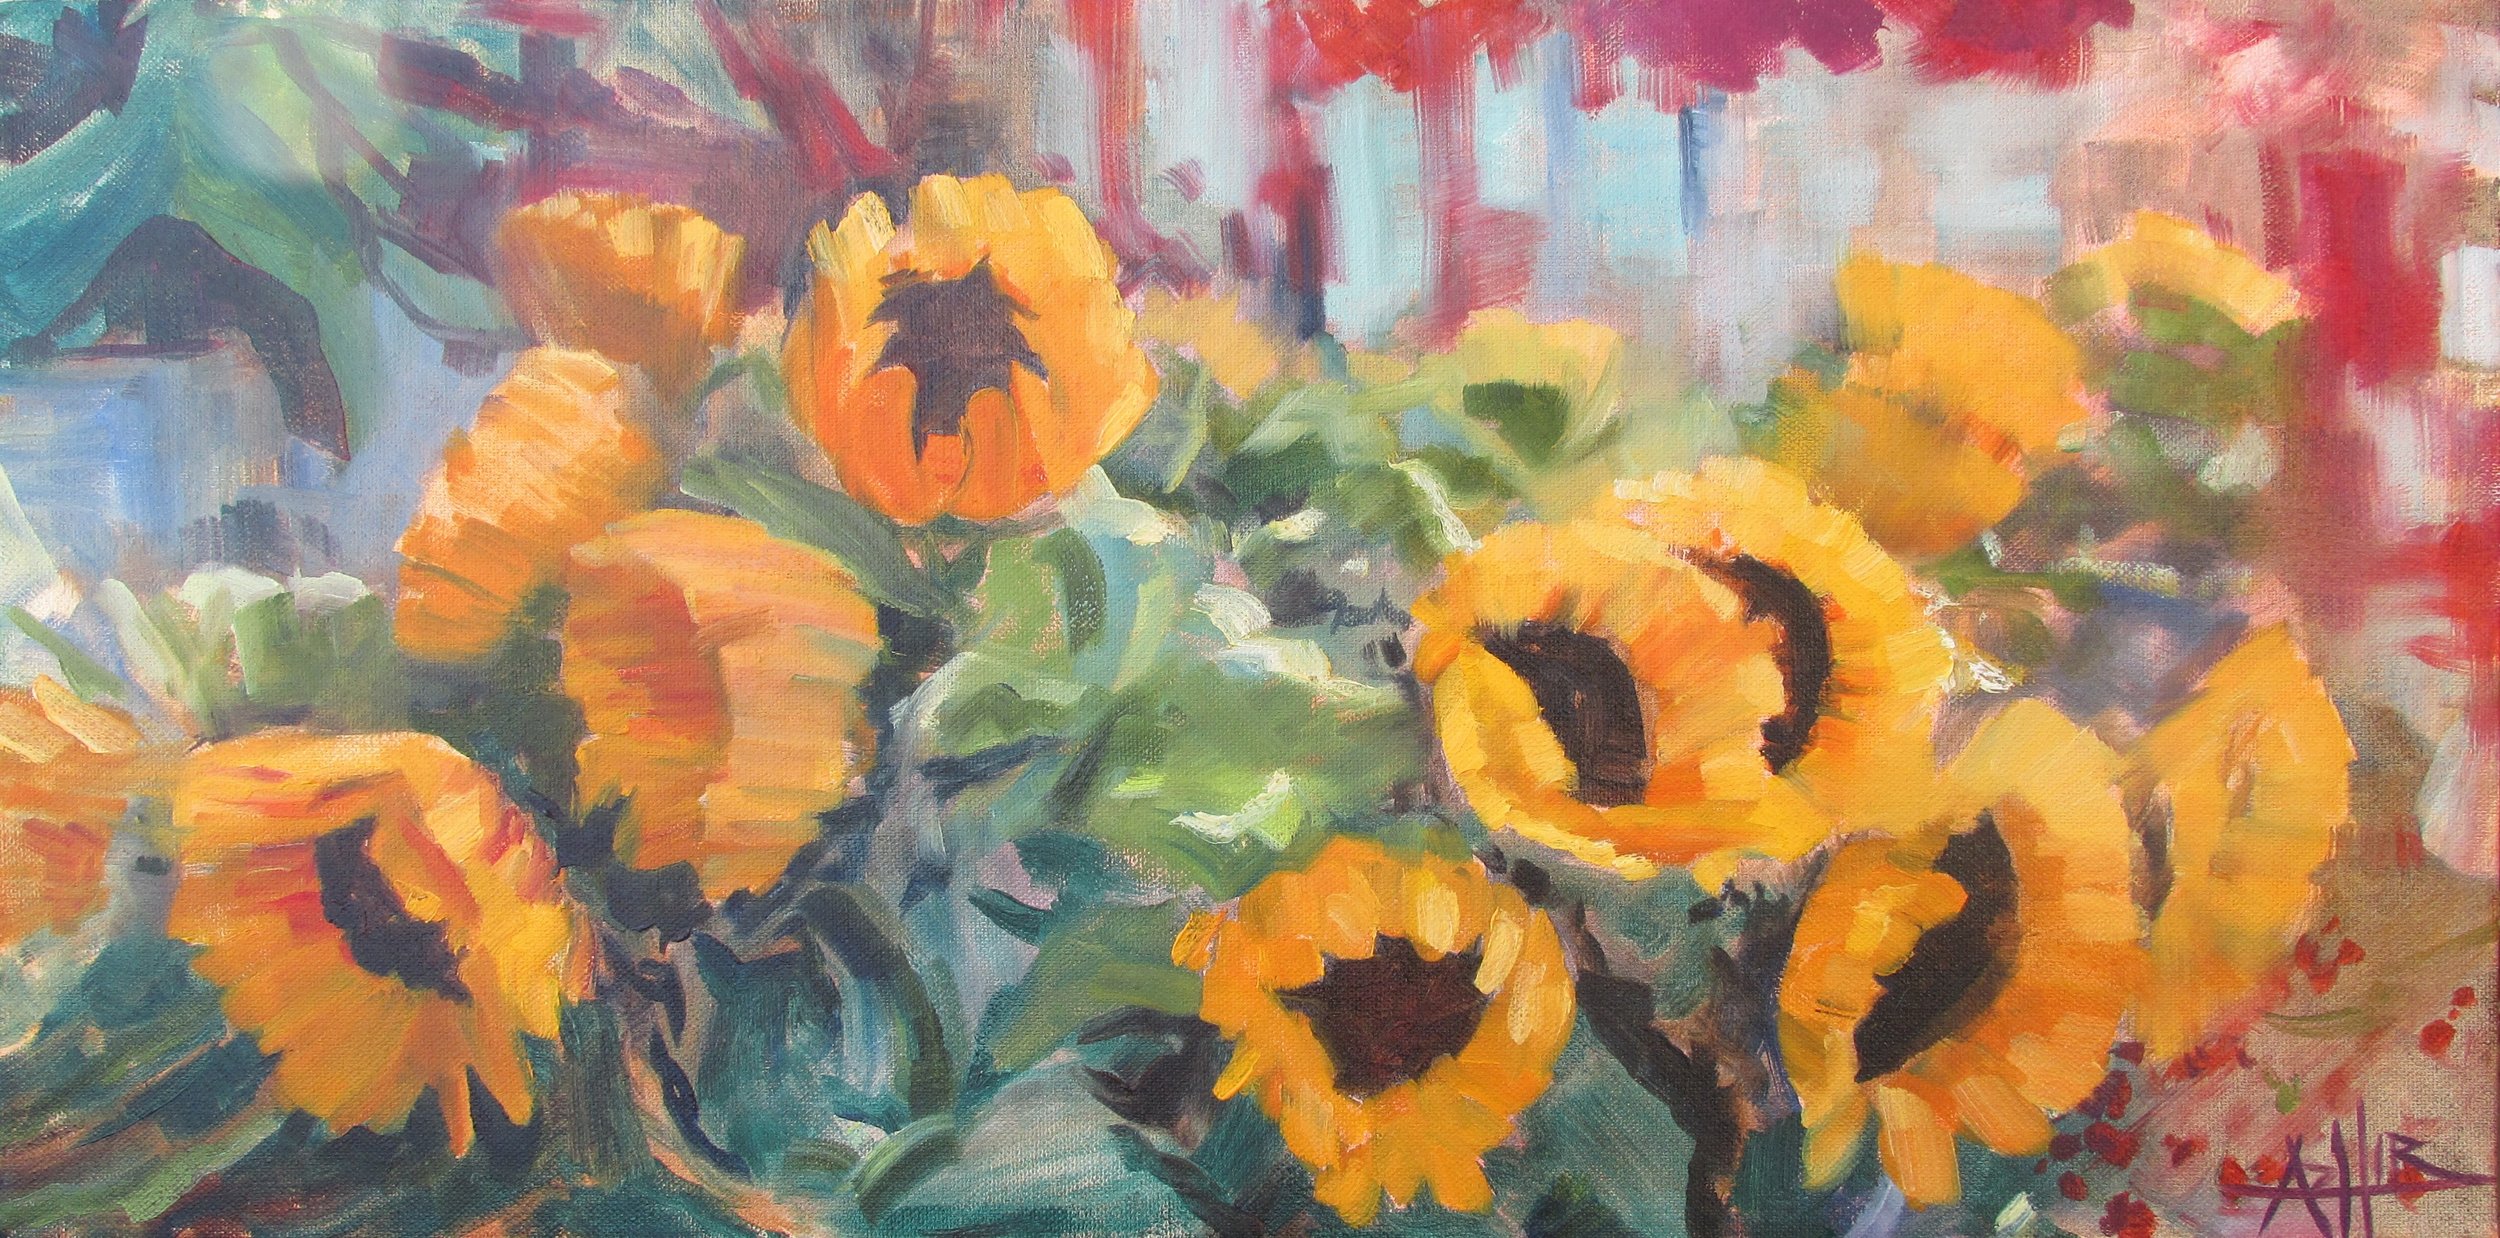 SOLD, Sunflowers in Berlin, Copyright 2016, Oil on Canvas, 12" x 24"